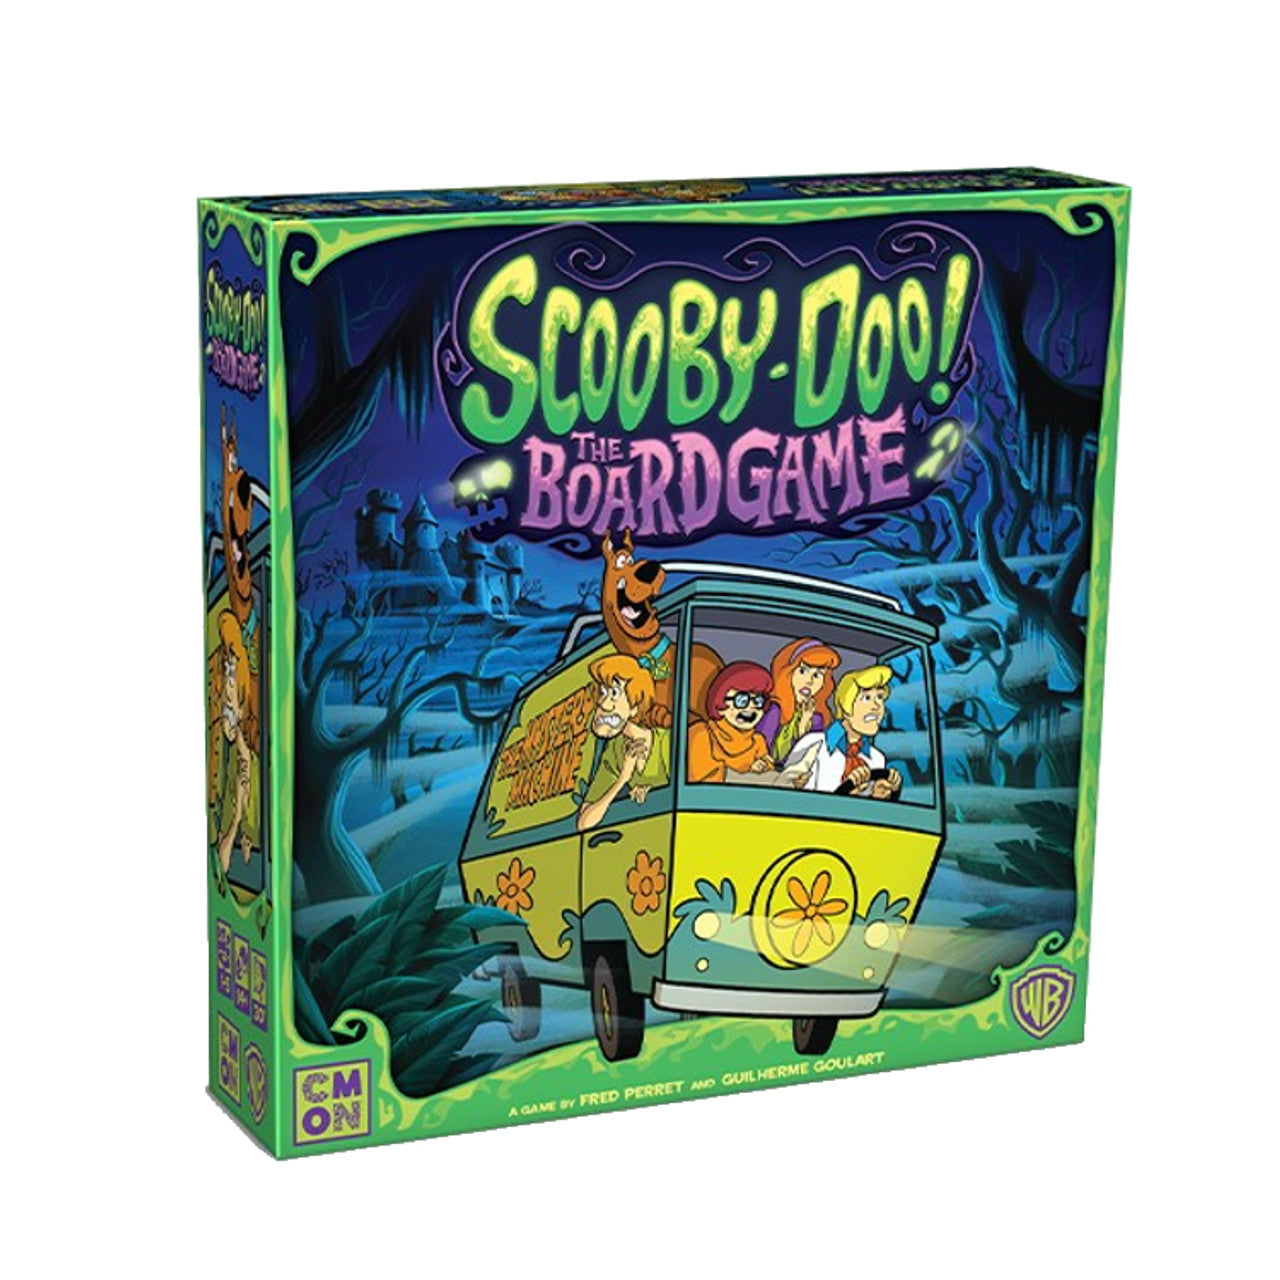 Scooby Doo the Board Game